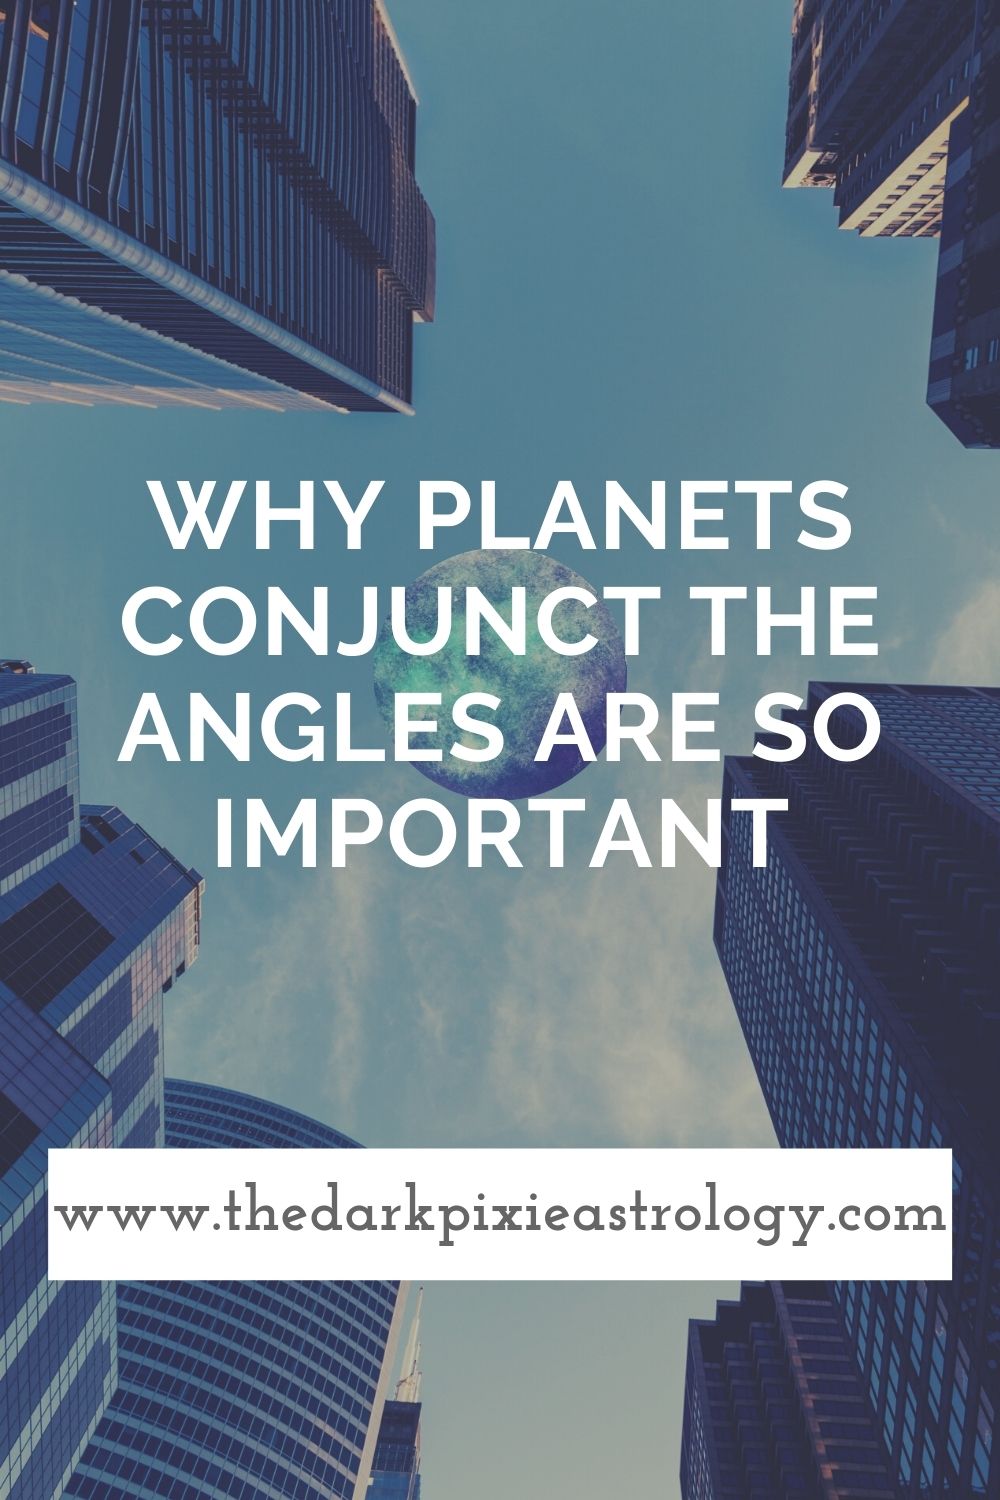 Why Planets Conjunct the Angles Are So Important - The Dark Pixie Astrology